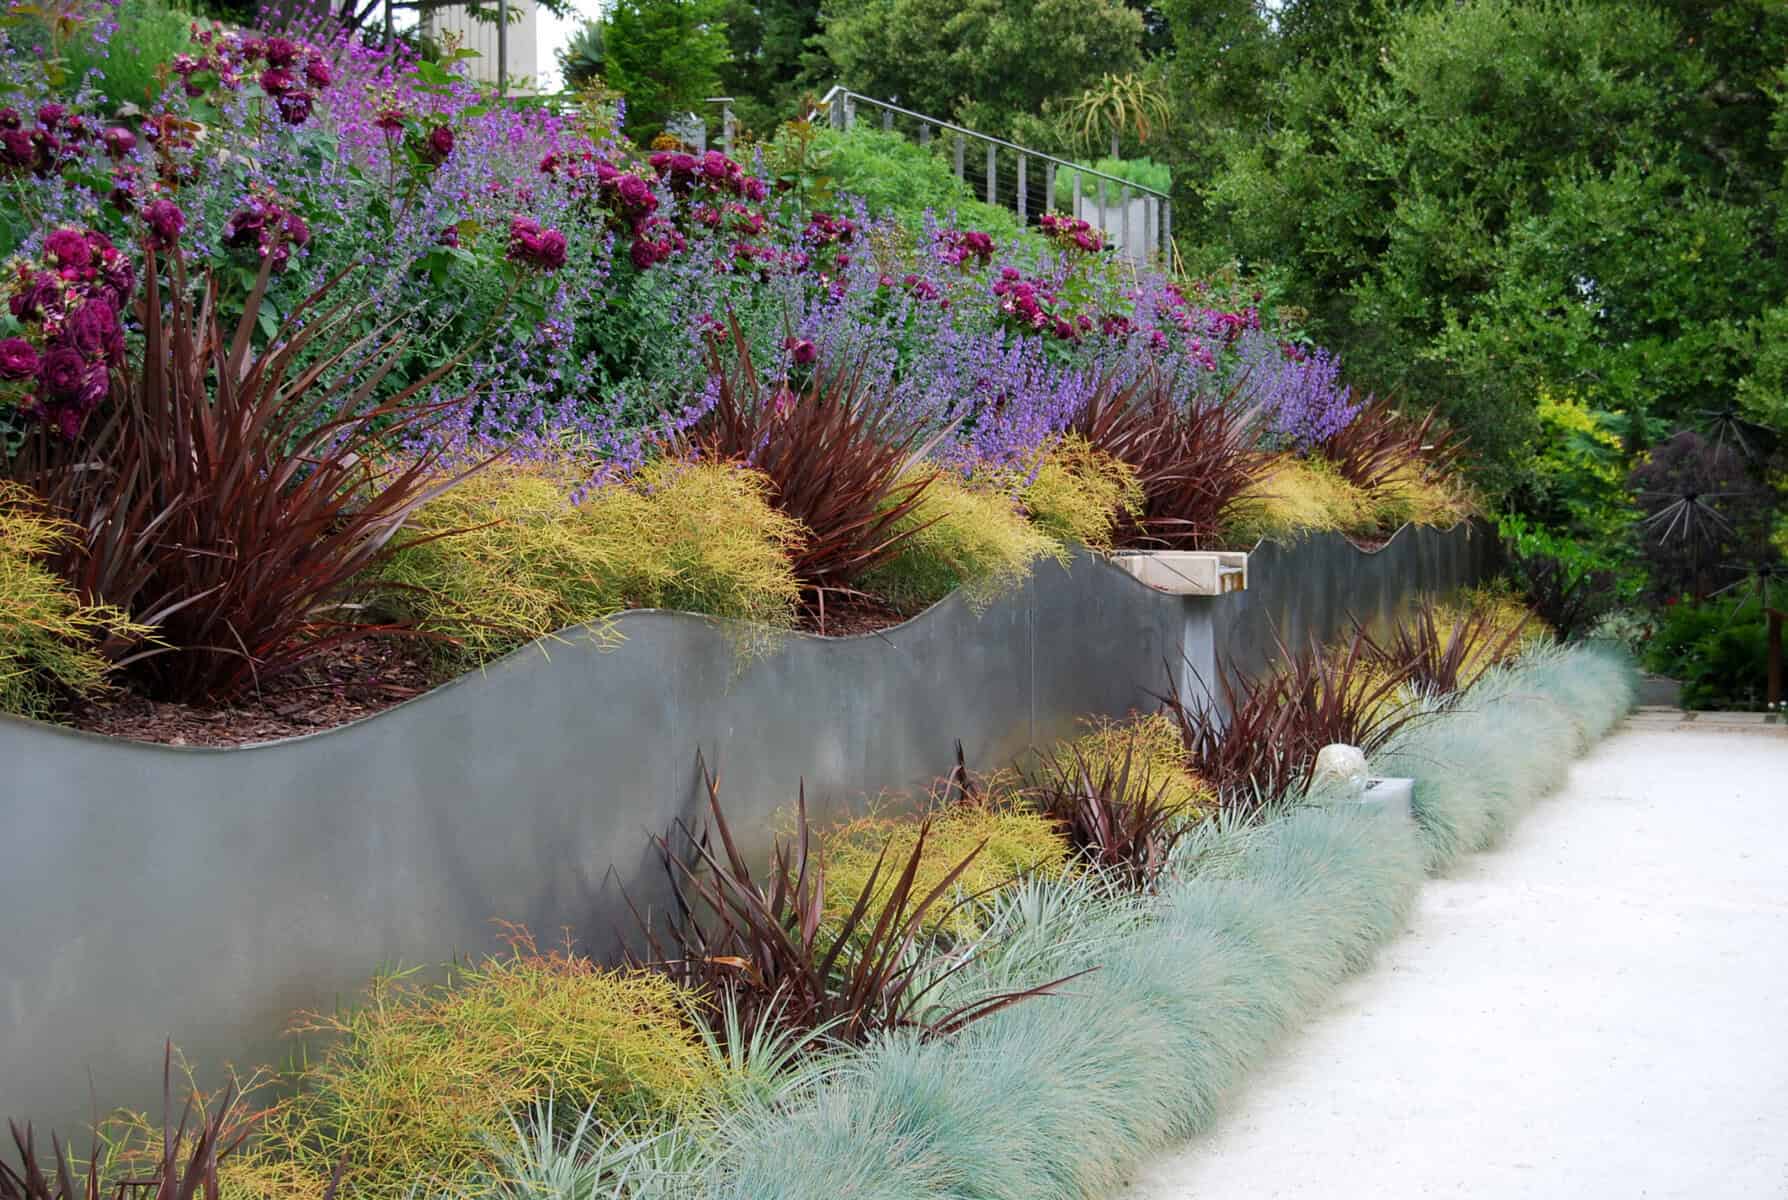 Nestled in Los Gatos, a beautifully landscaped Garden Gallery features vibrant purple and pink flowers, lush green and reddish-brown foliage, and variegated plants along a curving, wave-like gray retaining wall. A gravel pathway lined with blue-green grass runs alongside the wall.